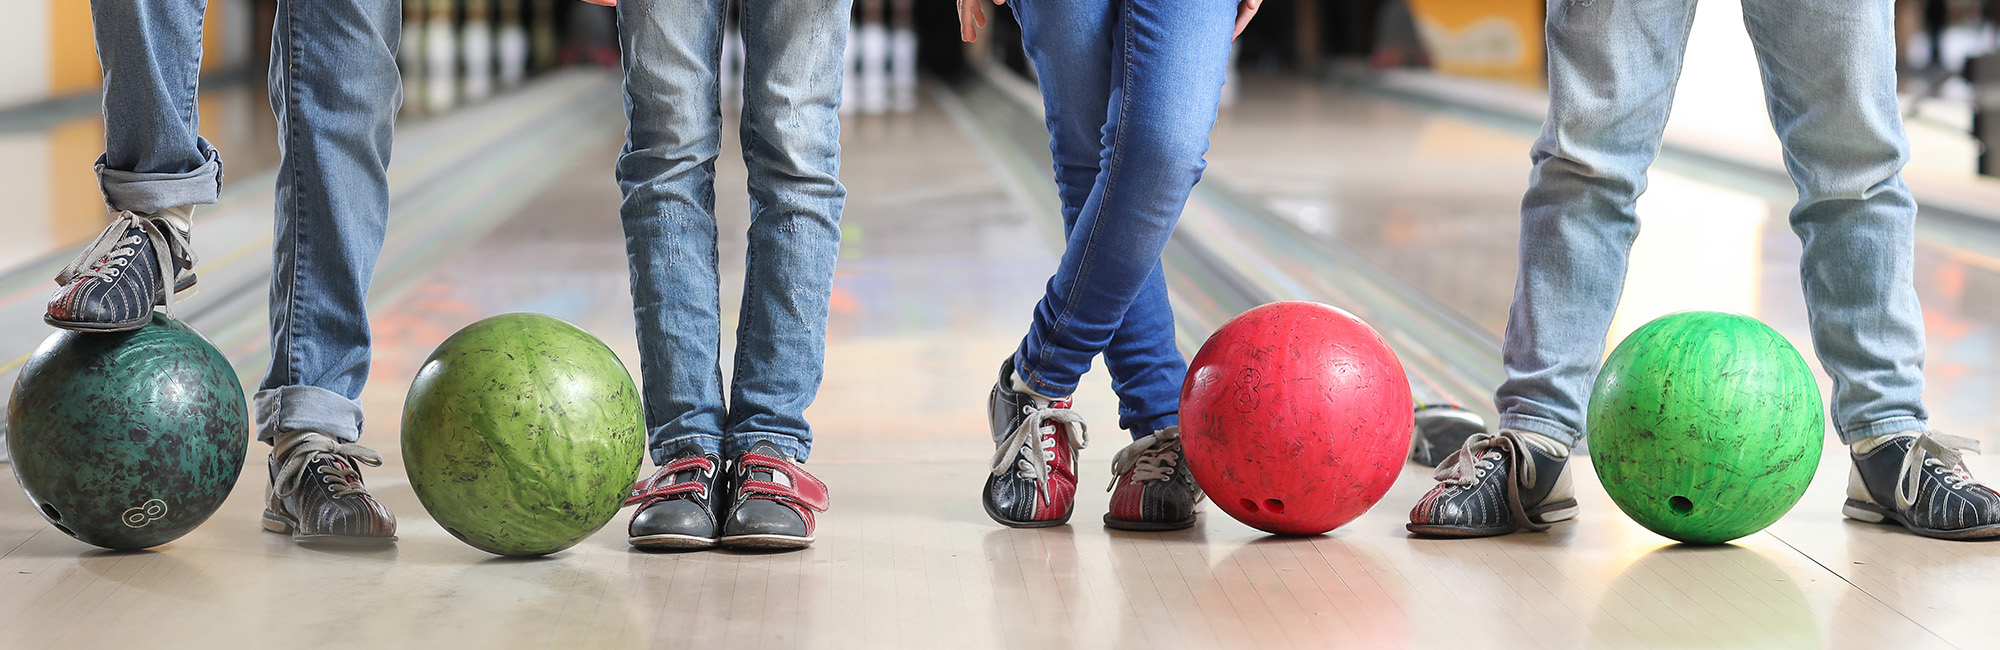 Kids with bowling balls and bowling shoes